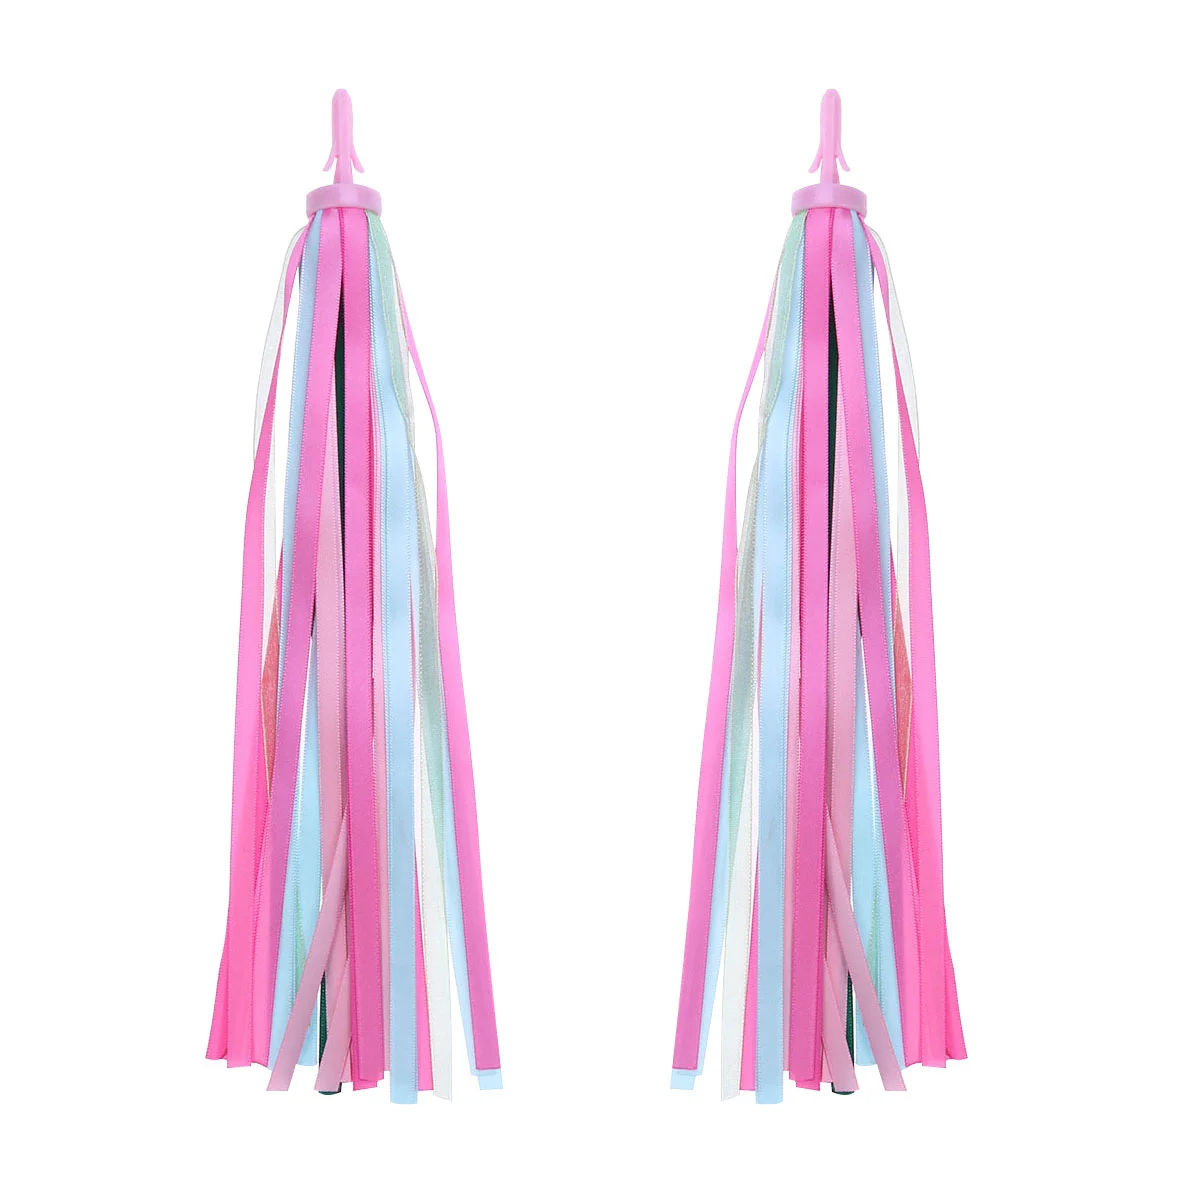 

One Pair of Childrens Bike Handlebar Streamers Bicycle Grips Tassels Ribbons Baby Carrier Accessories (Pink)